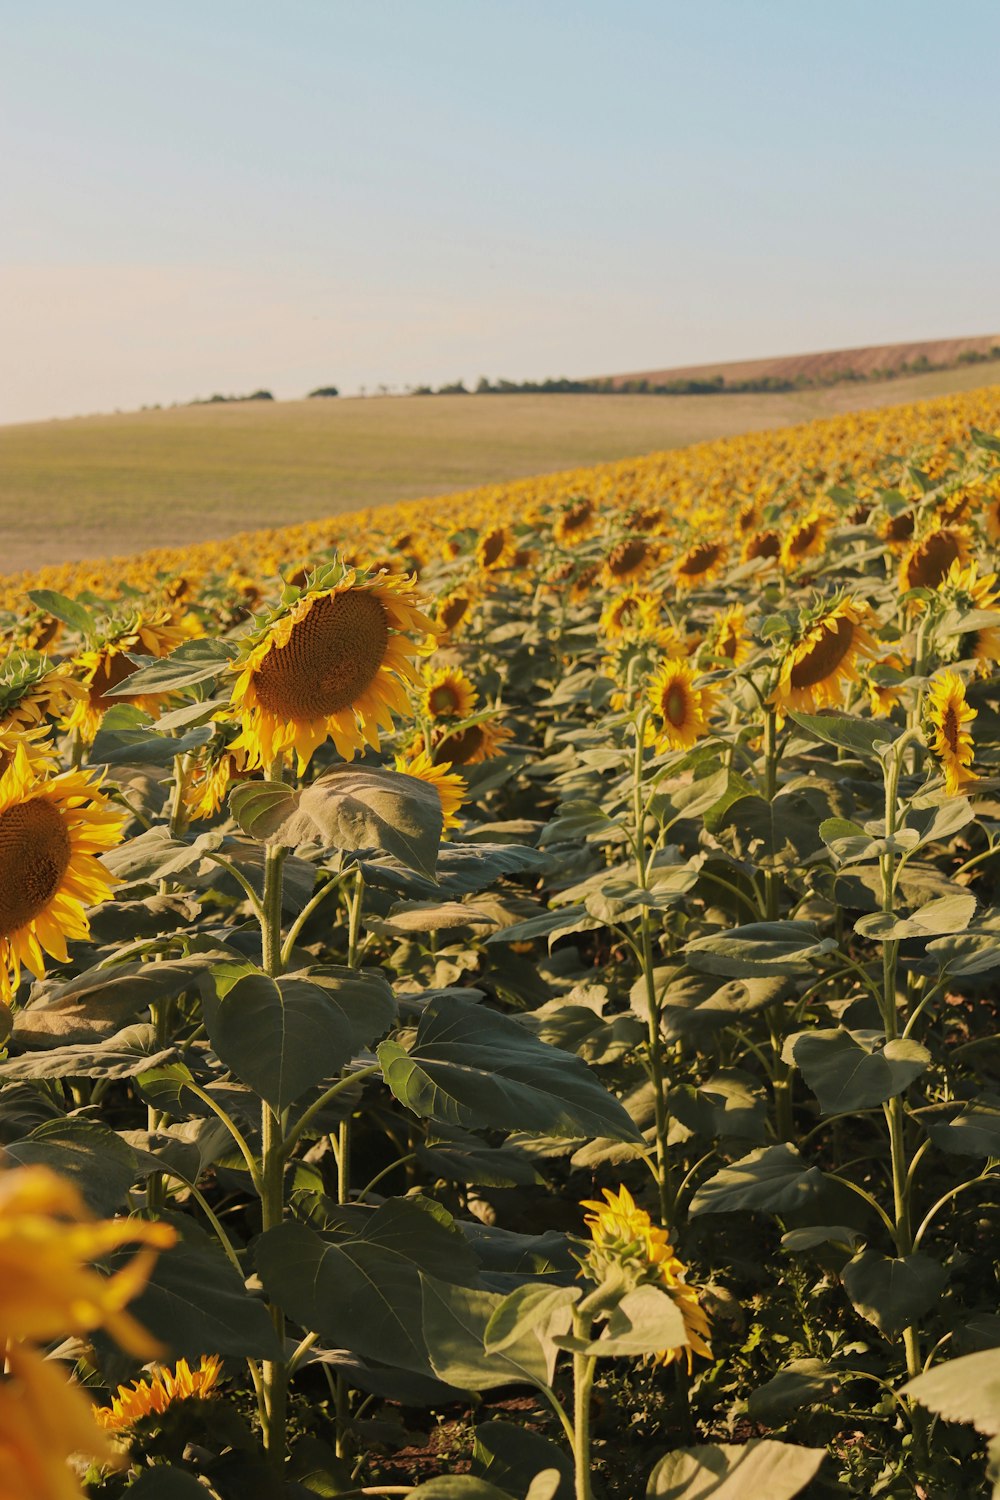 a large field of sunflowers on a sunny day